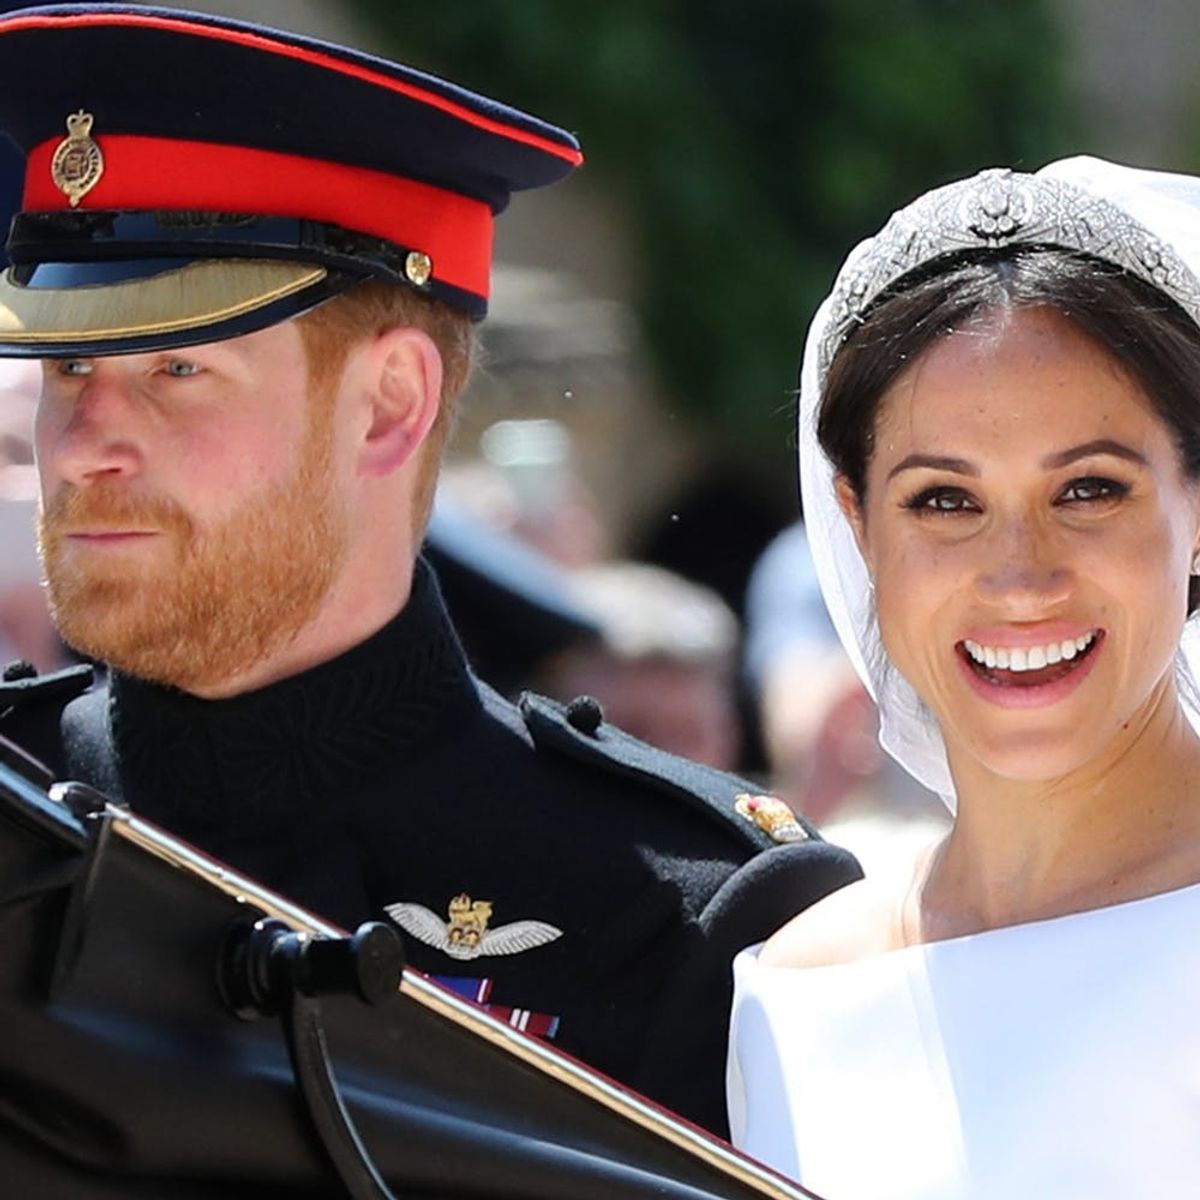 Meghan Markle and Prince Harry’s Horse-Drawn Carriage Procession Was a Fairytale Come True